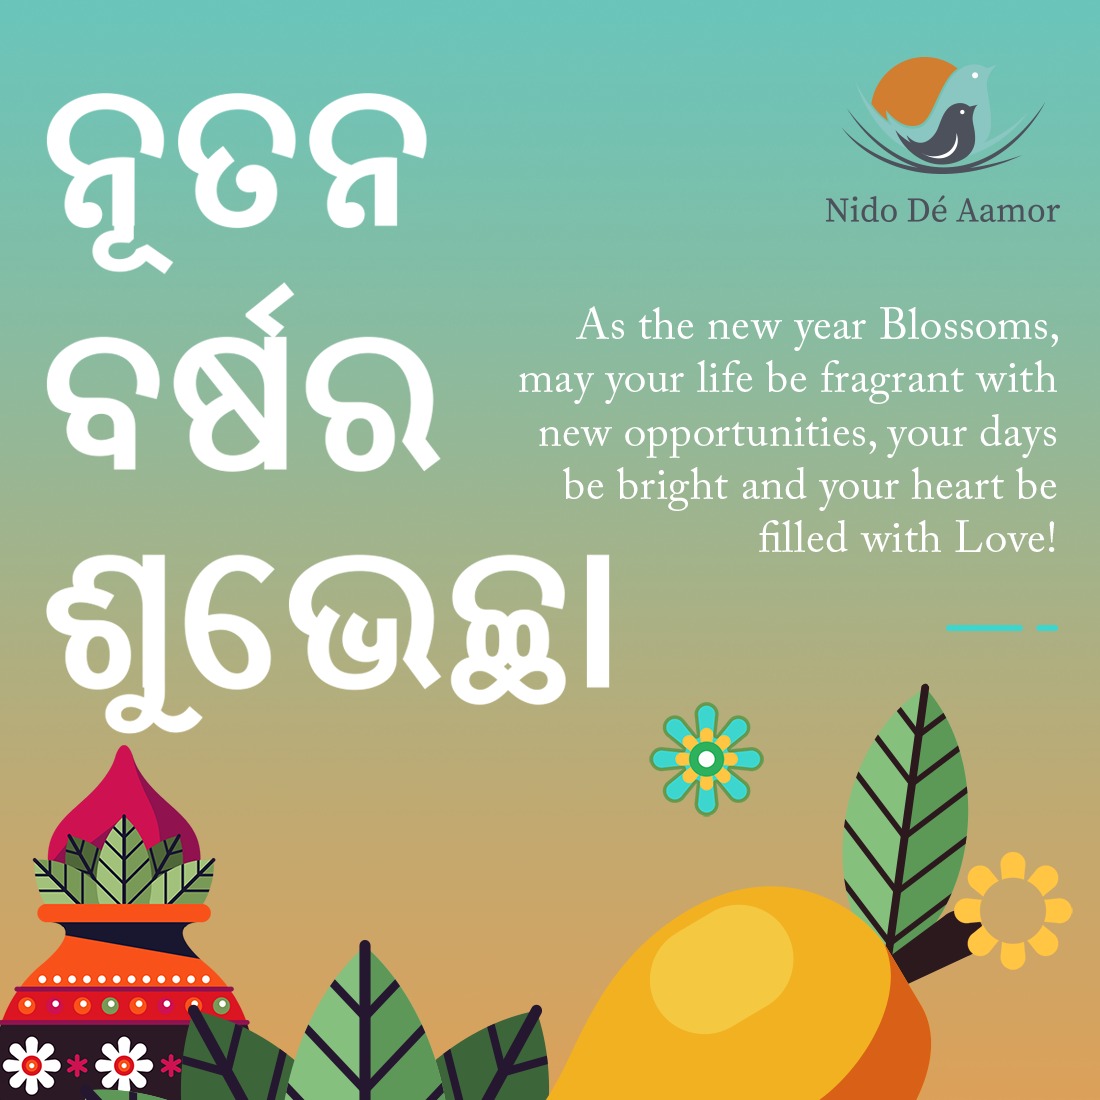 Wishing you and your family a very happy and prosperous Maha Bisubha Sankranti.

May this new year bring you joy, peace, and success.

#PanaSankranti #MahaBisubaSankranti #OdiyaNewYear #NewYear #Odisha #Festival #Celebrations #NidoDeAamor